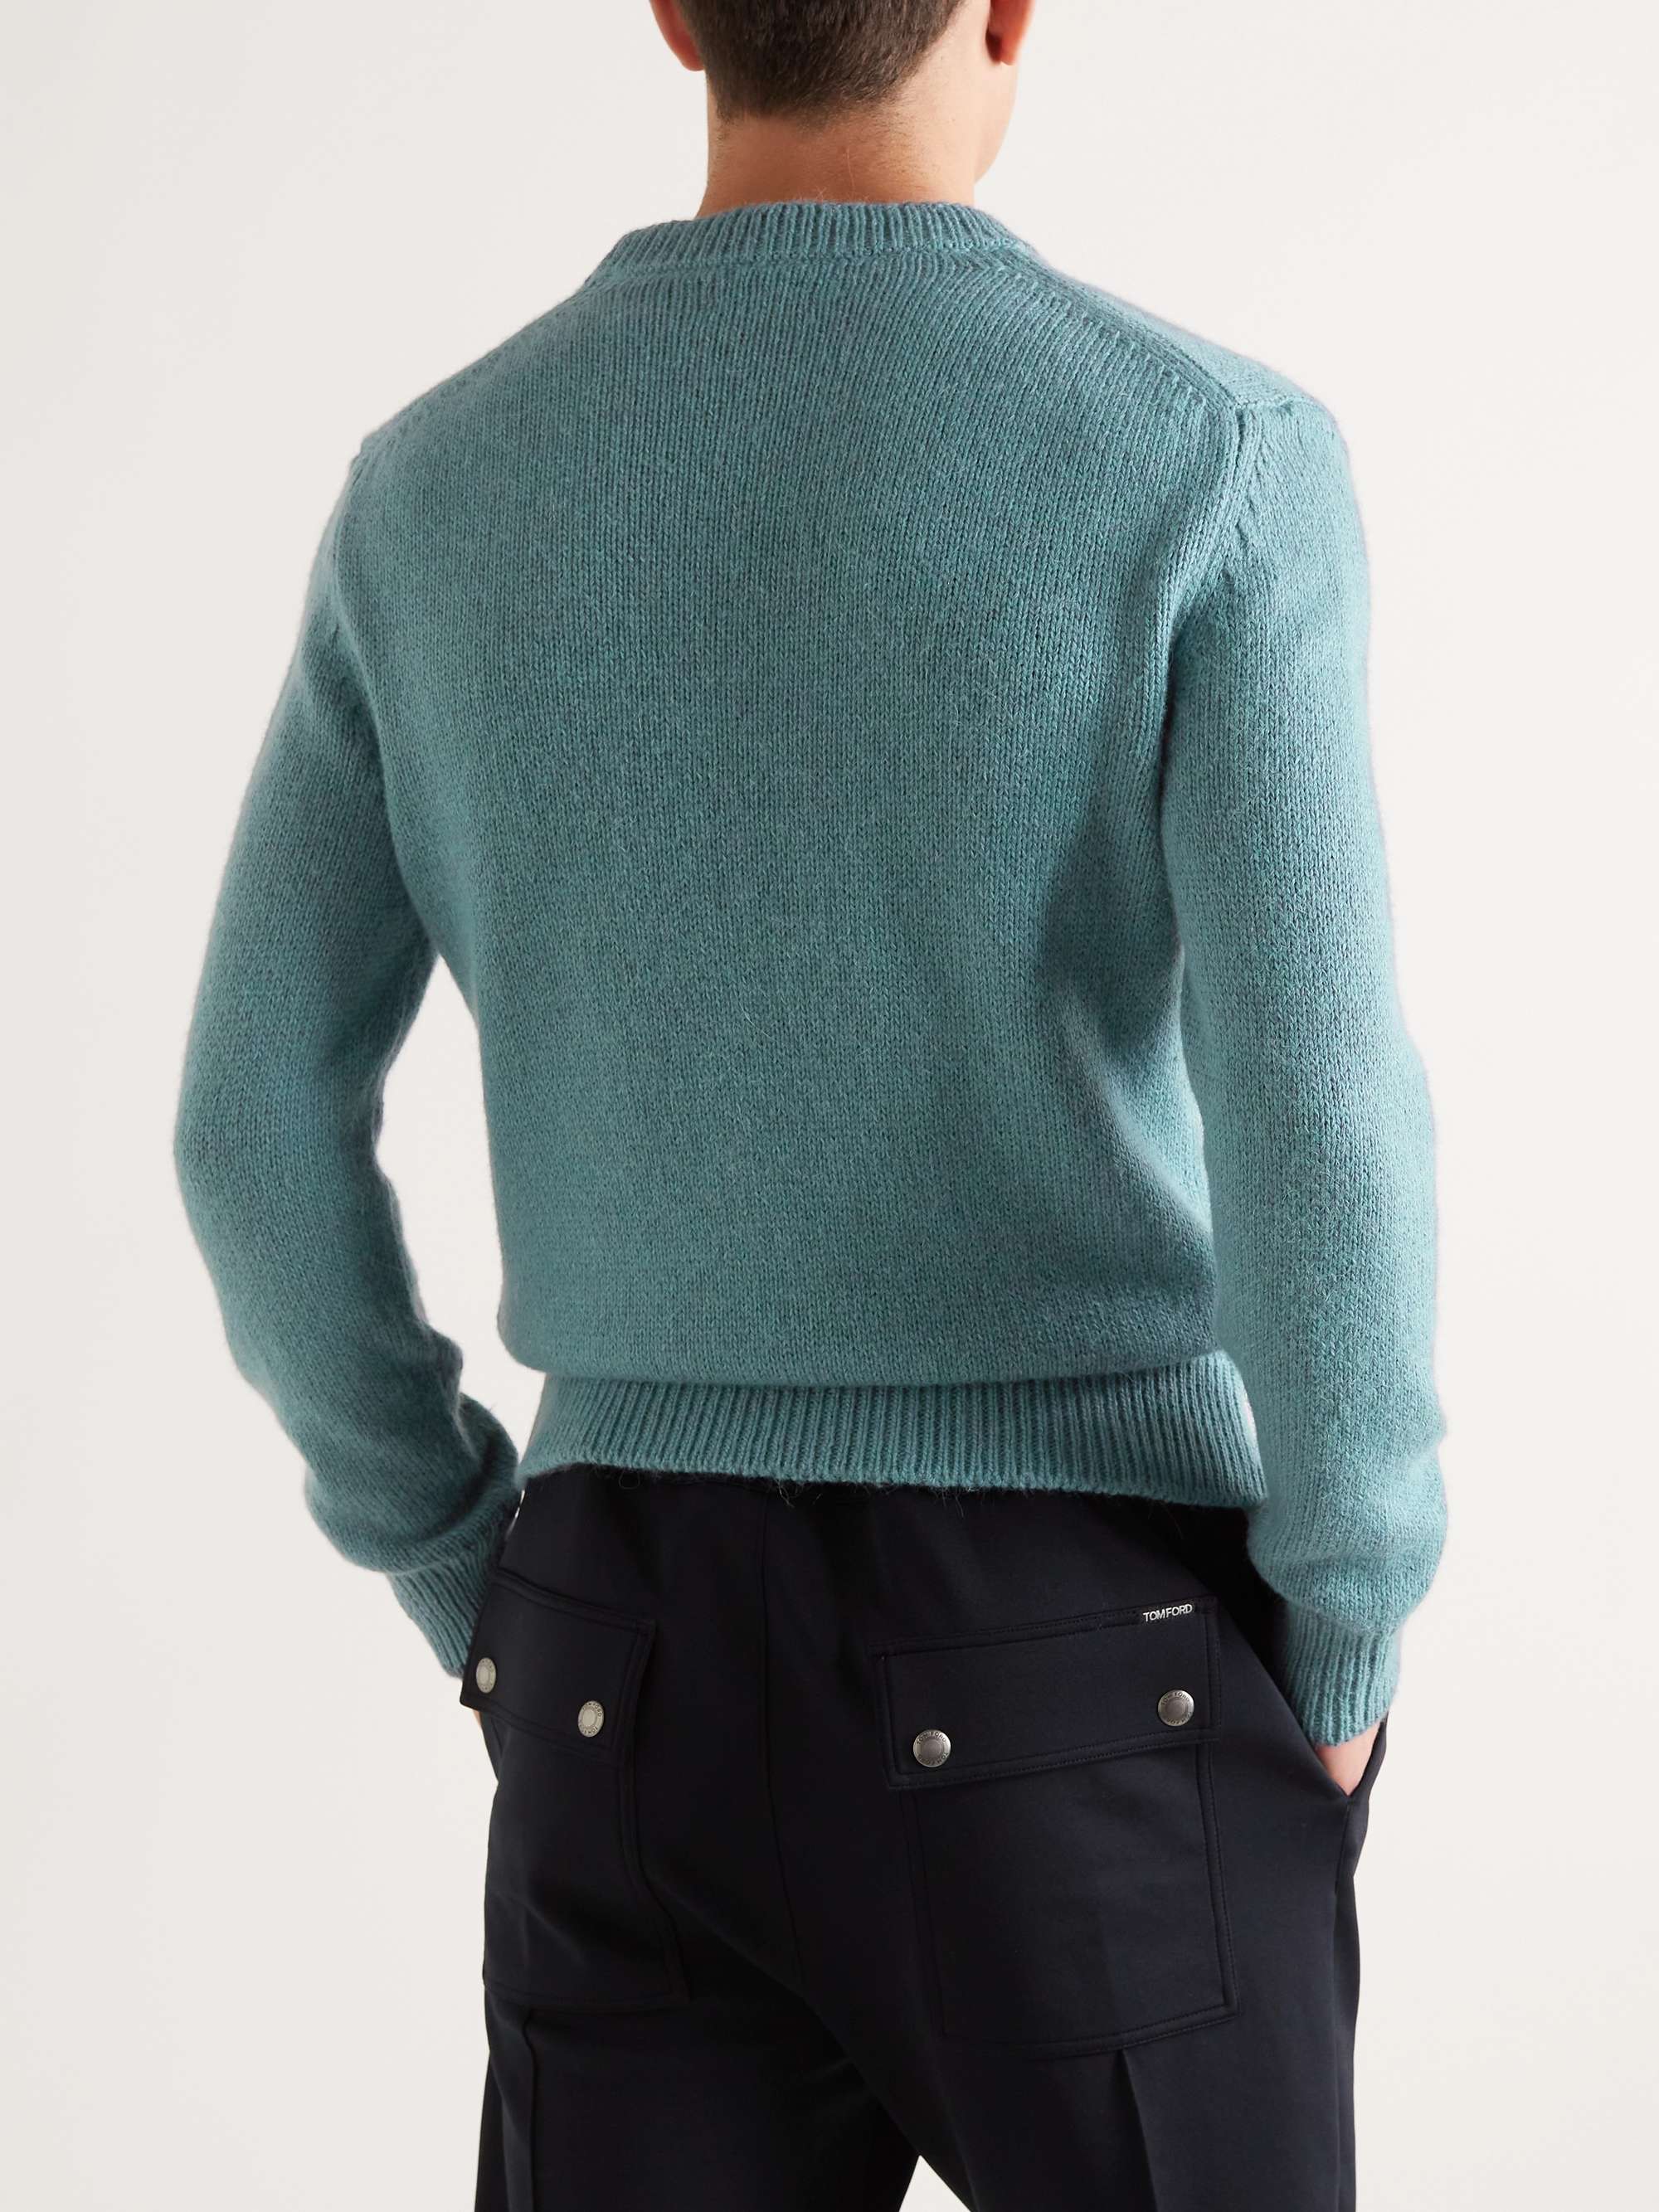 TOM FORD Cashmere and Wool-Blend Sweater